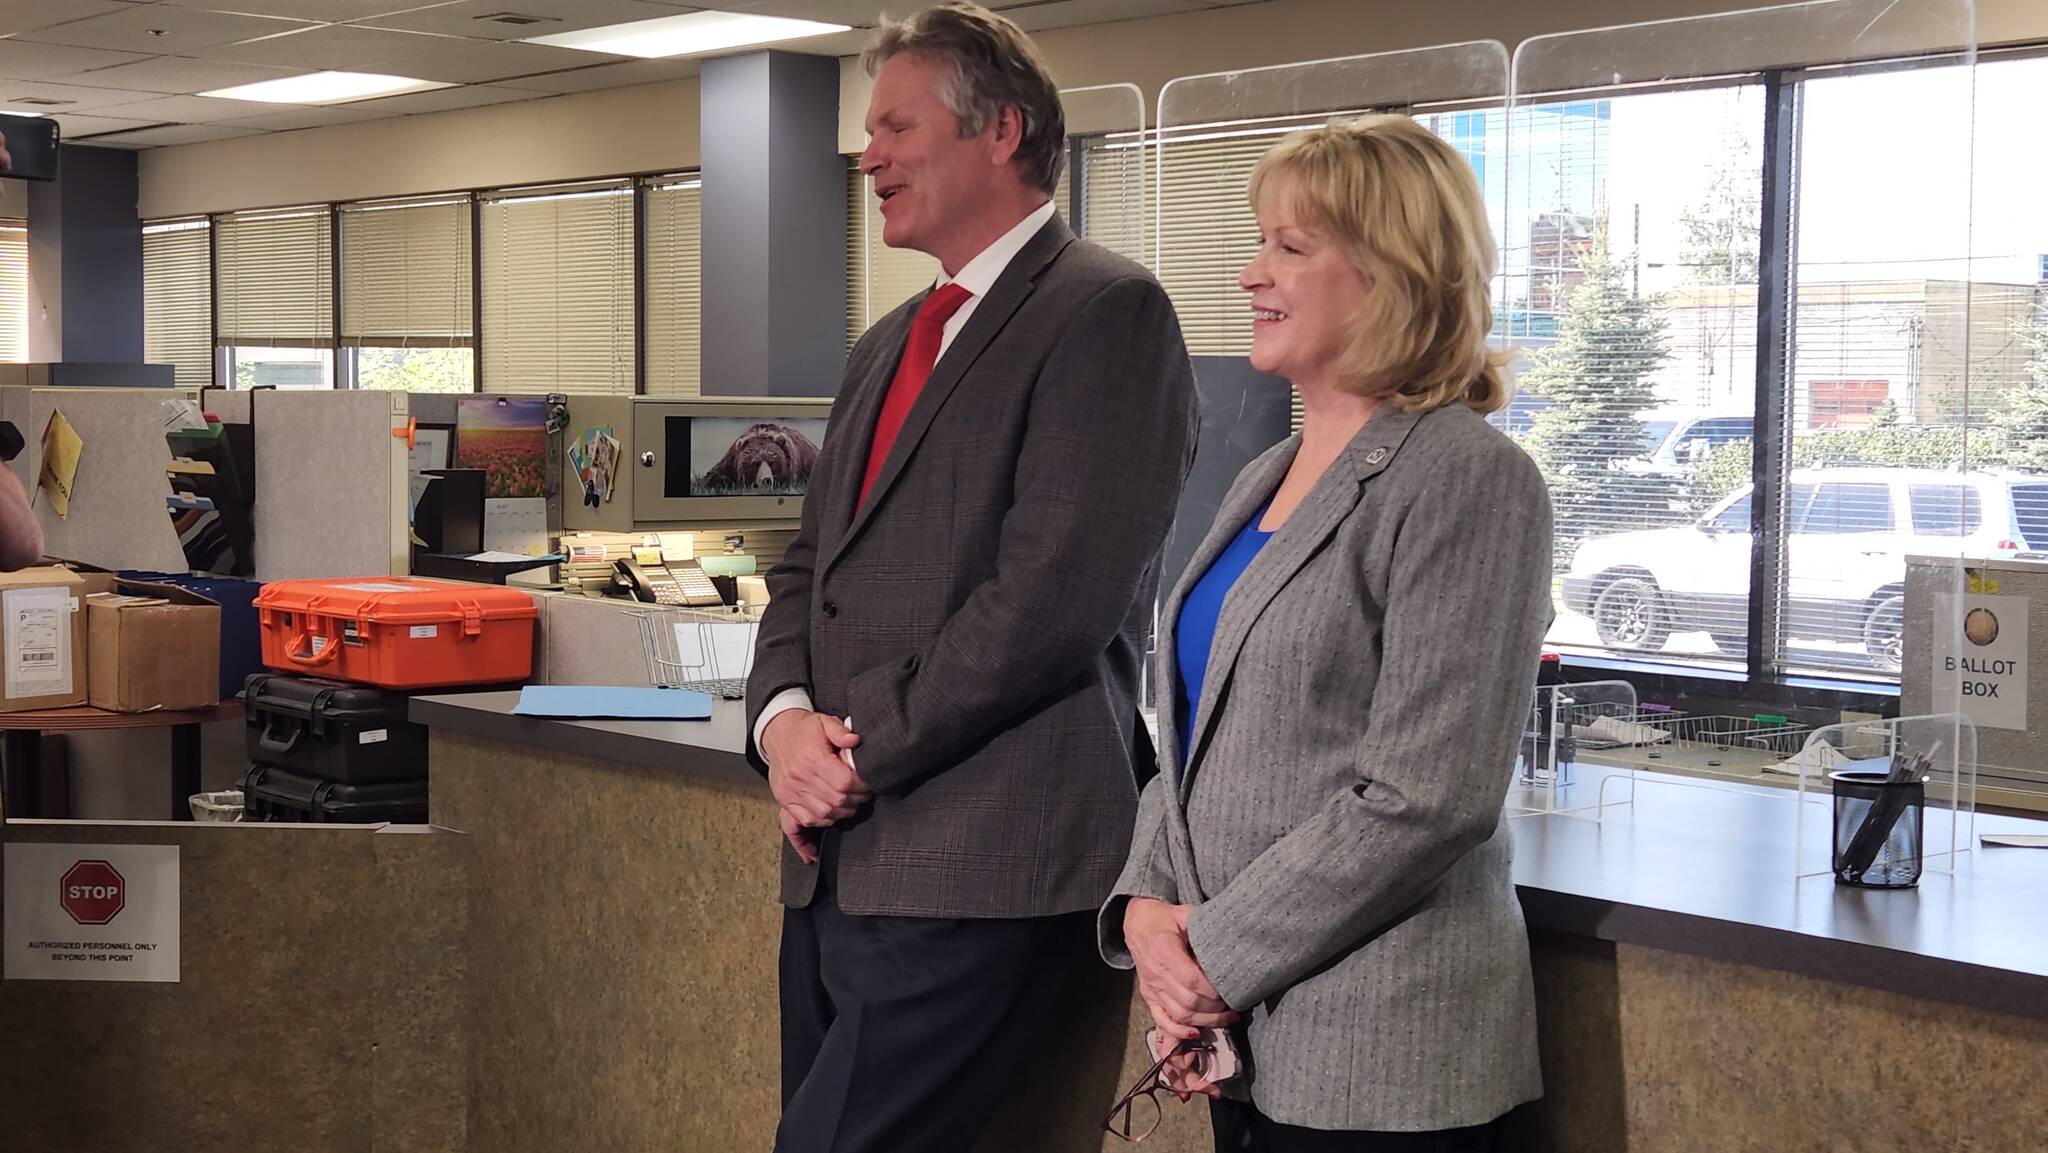 Courtesy photo / Andrew Jensen
Gov. Mike Dunleavy and former Department of Corrections Commissioner Nancy Dahlstrom filed to run on the same ticket for governor and lieutenant governor at an Anchorage Division of Elections office on Monday.